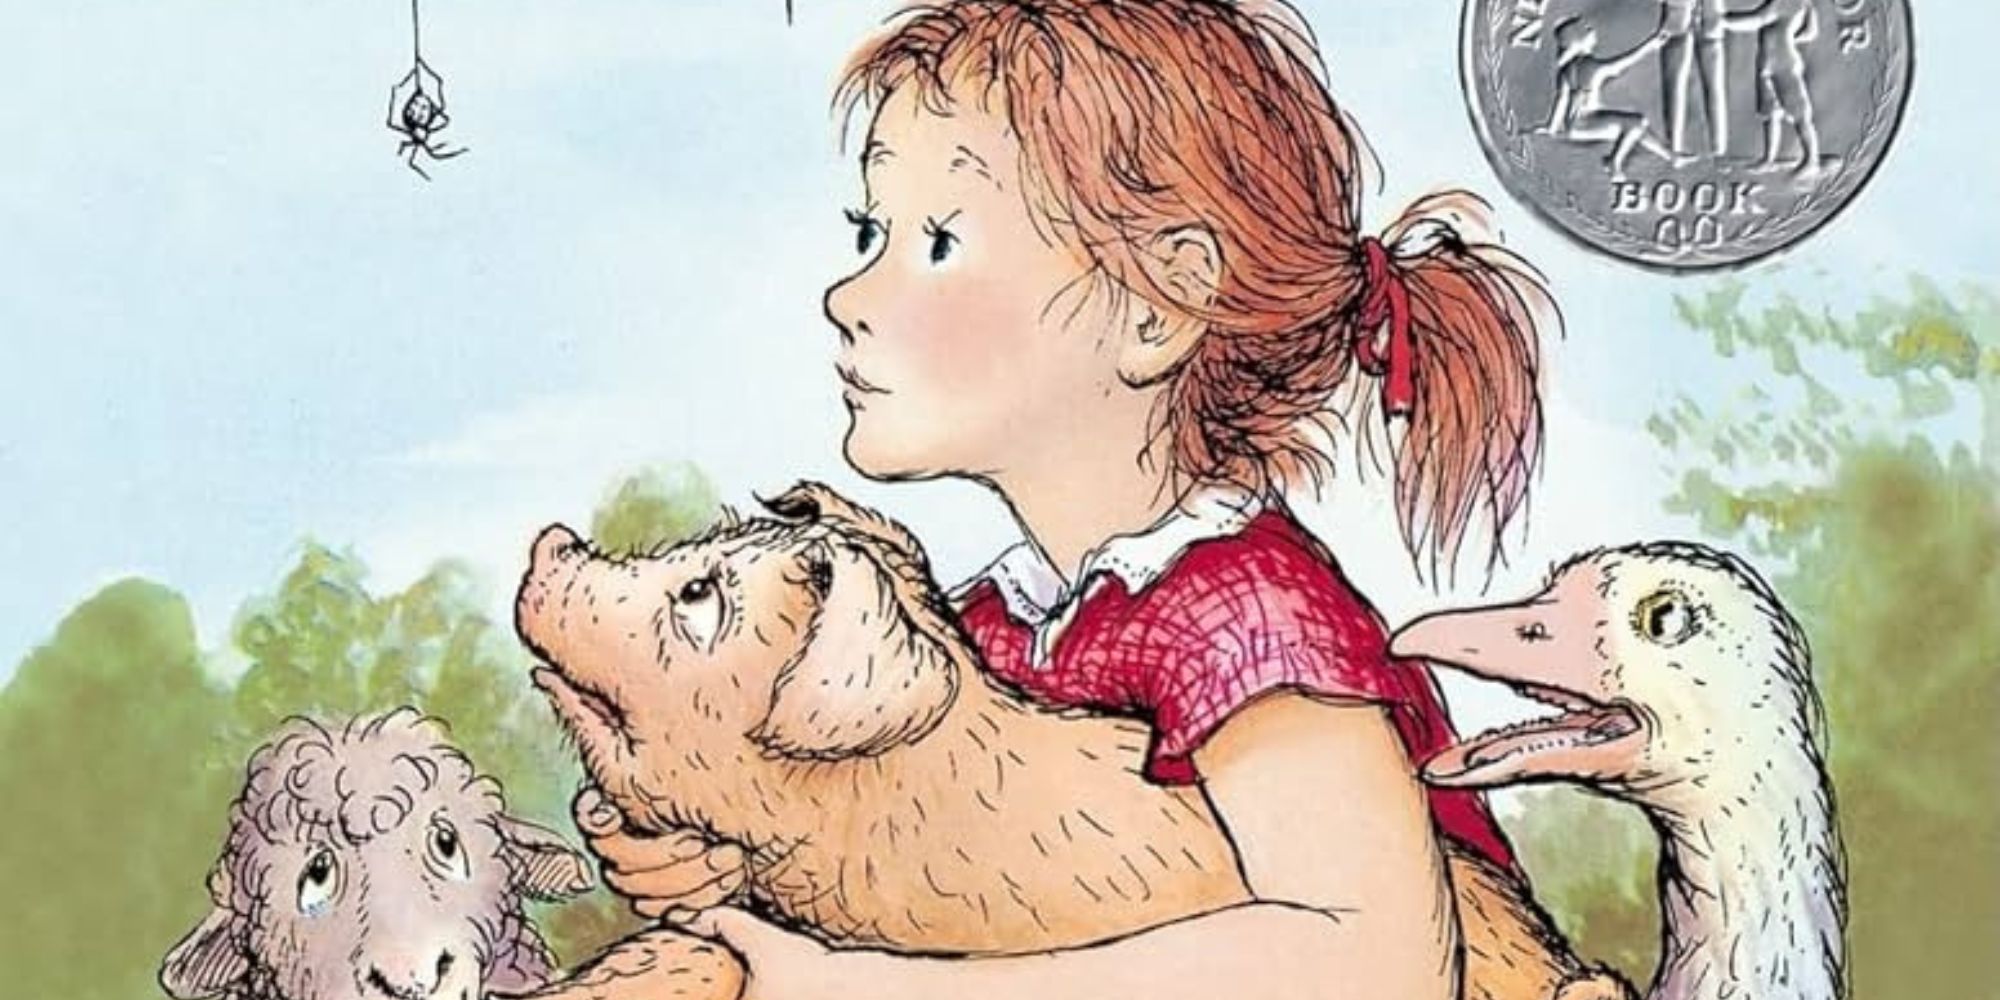 Charlotte's web book cover cropped